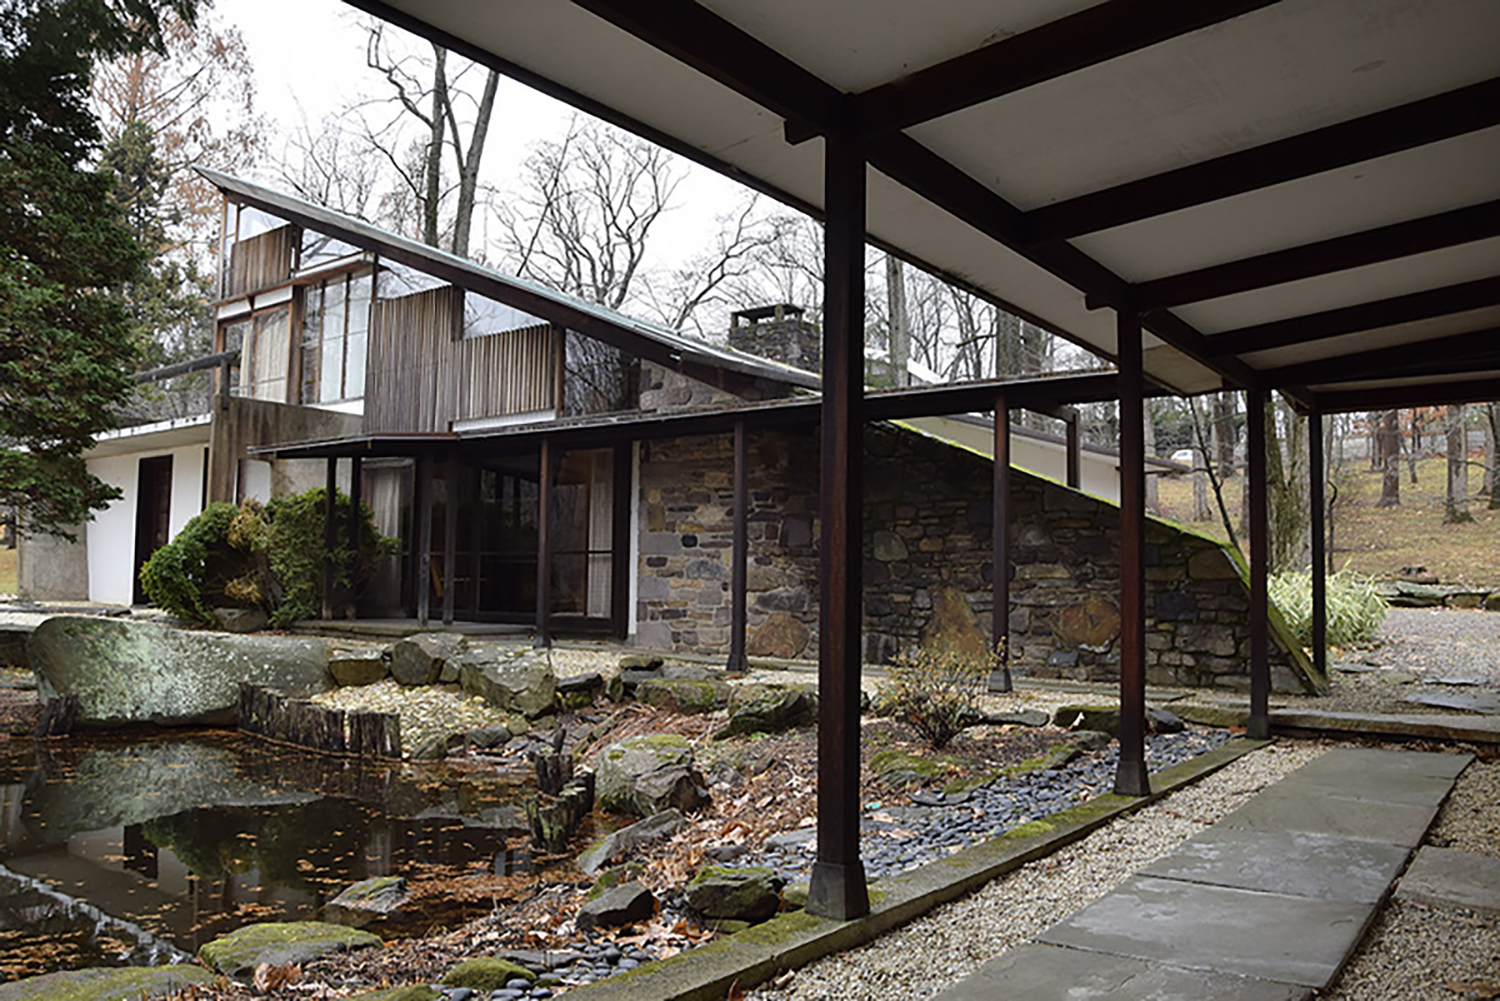 George Nakashima’s Arts Building, the facade of the house with a portico and a small pond surrounded by stones.